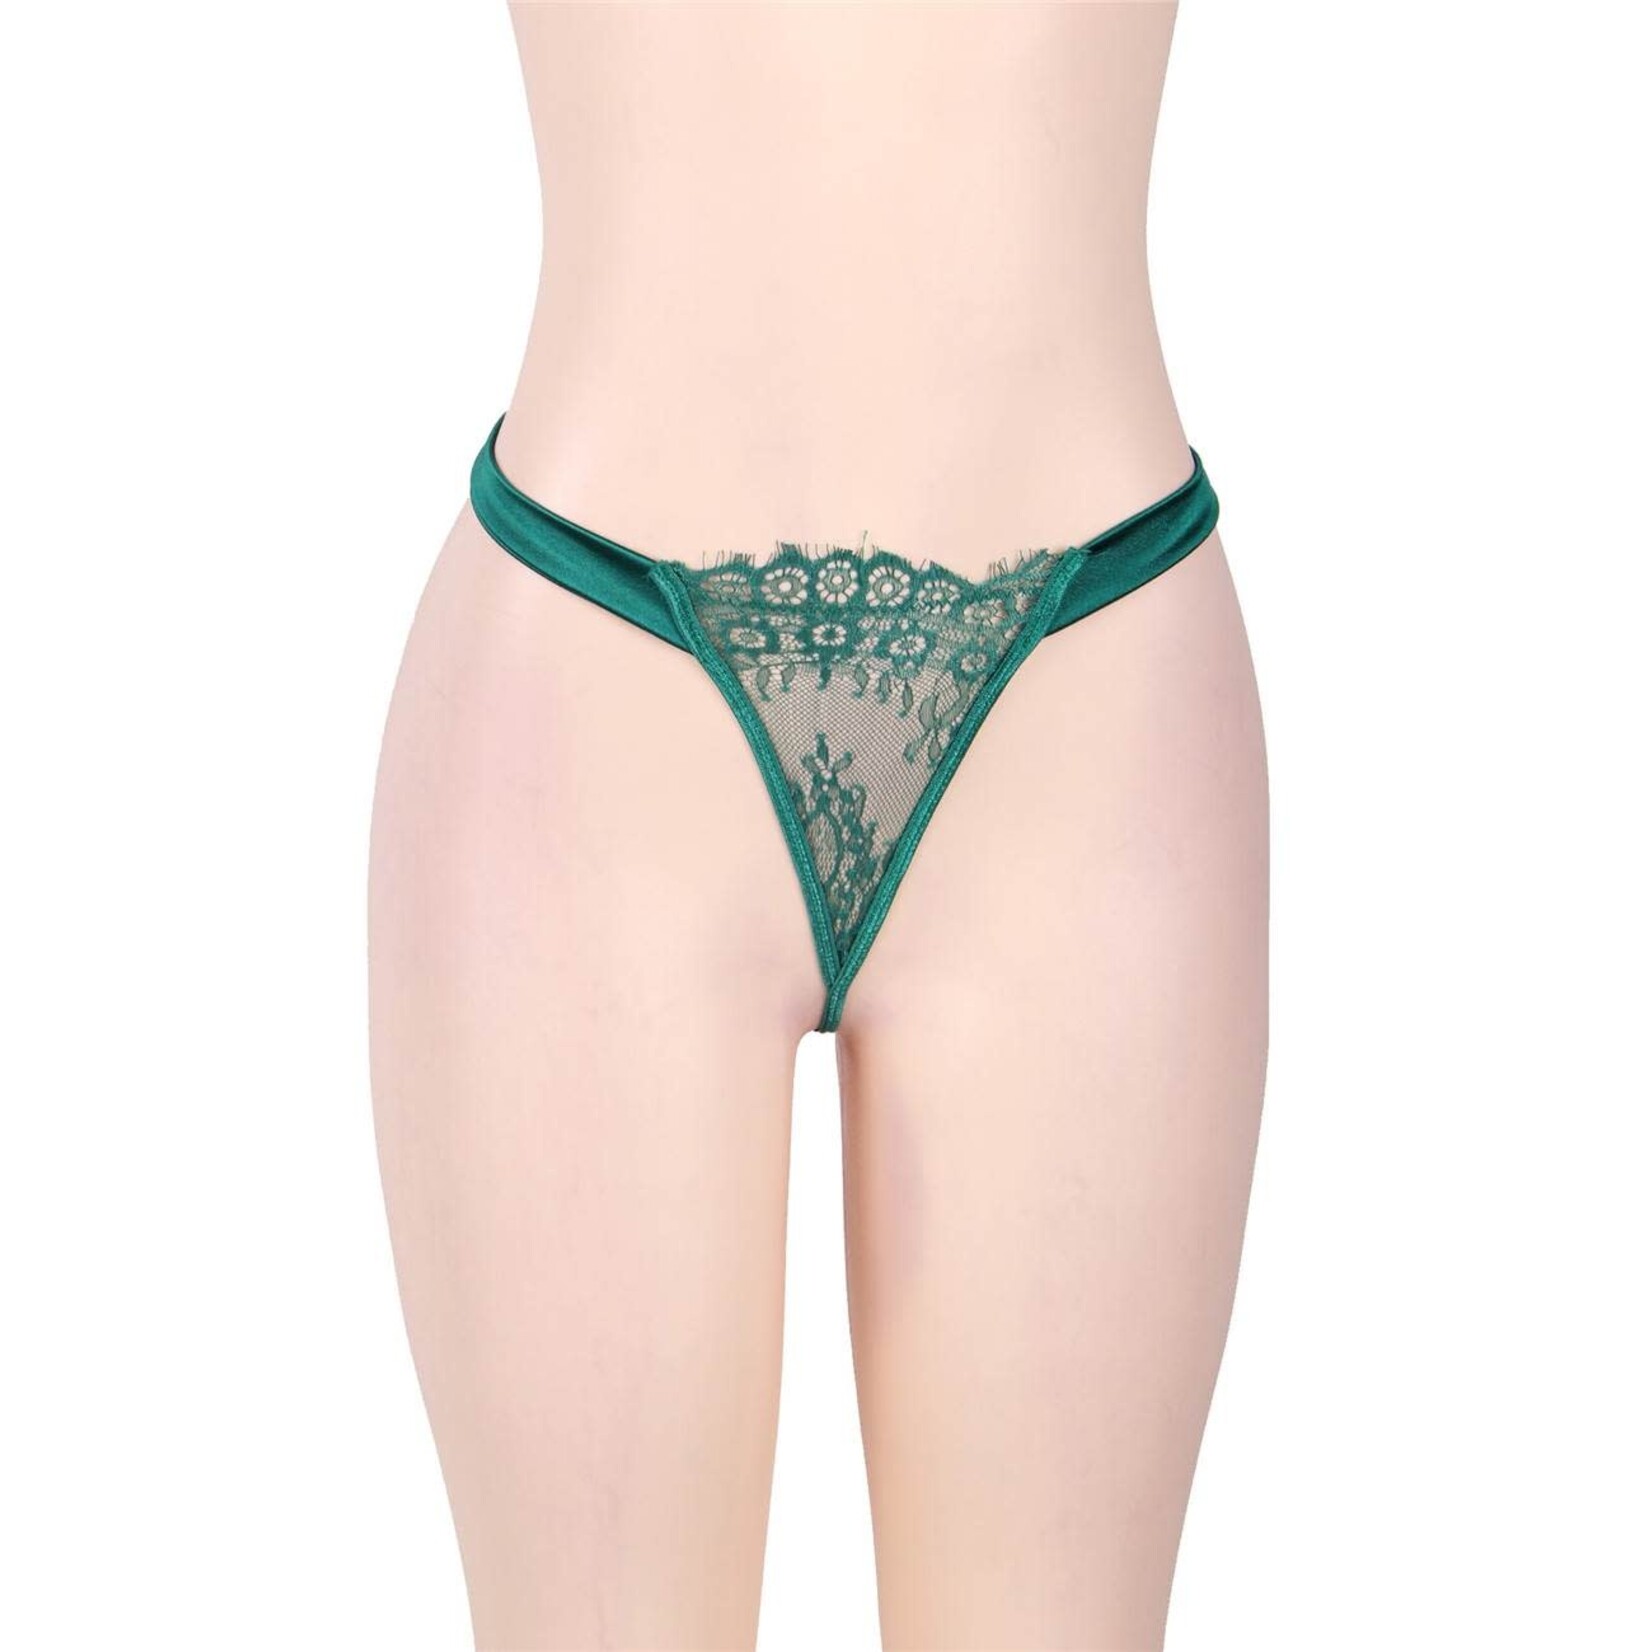 OH YEAH! -  ELEGANT EYELASH LACE PLUS SIZE GARTER GREEN LINGERIE WITH UNDERWIRE 3XL-4XL